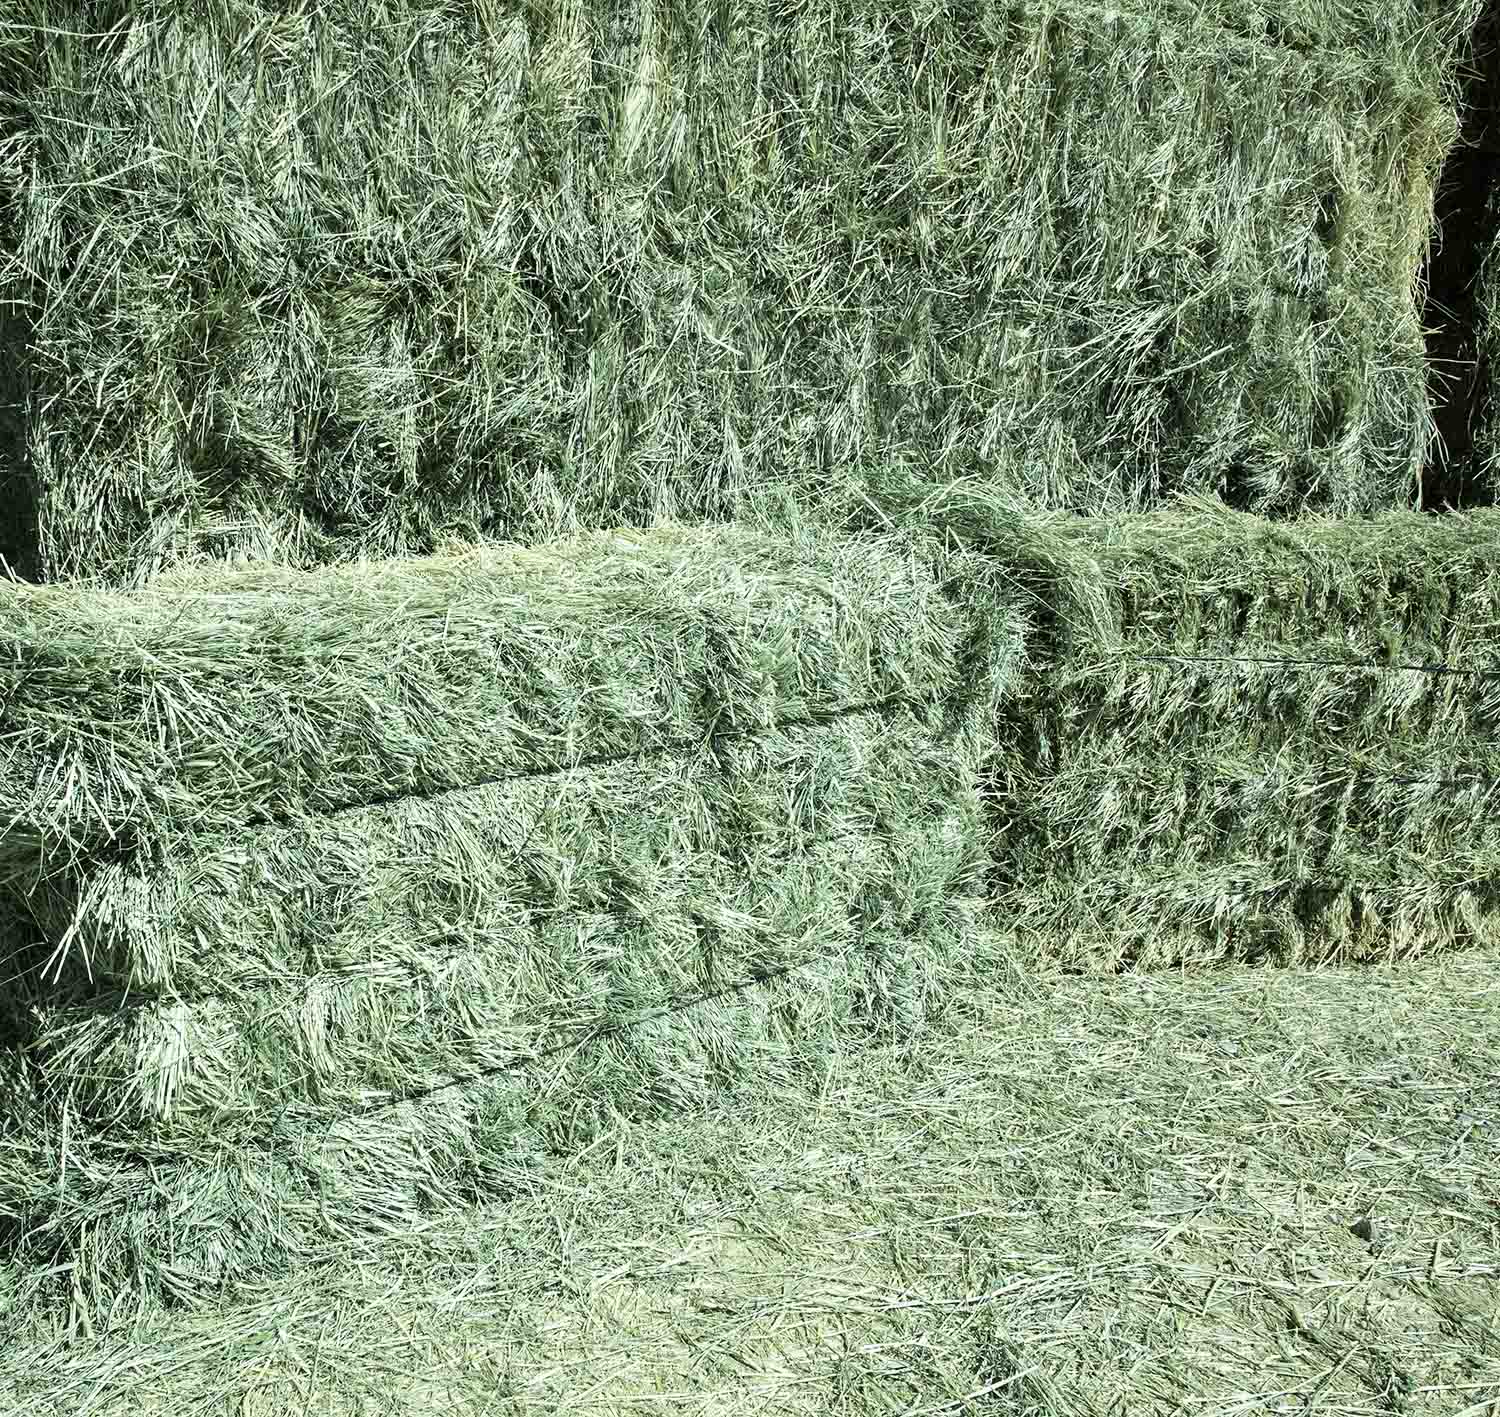 What is the difference between round and square bales?